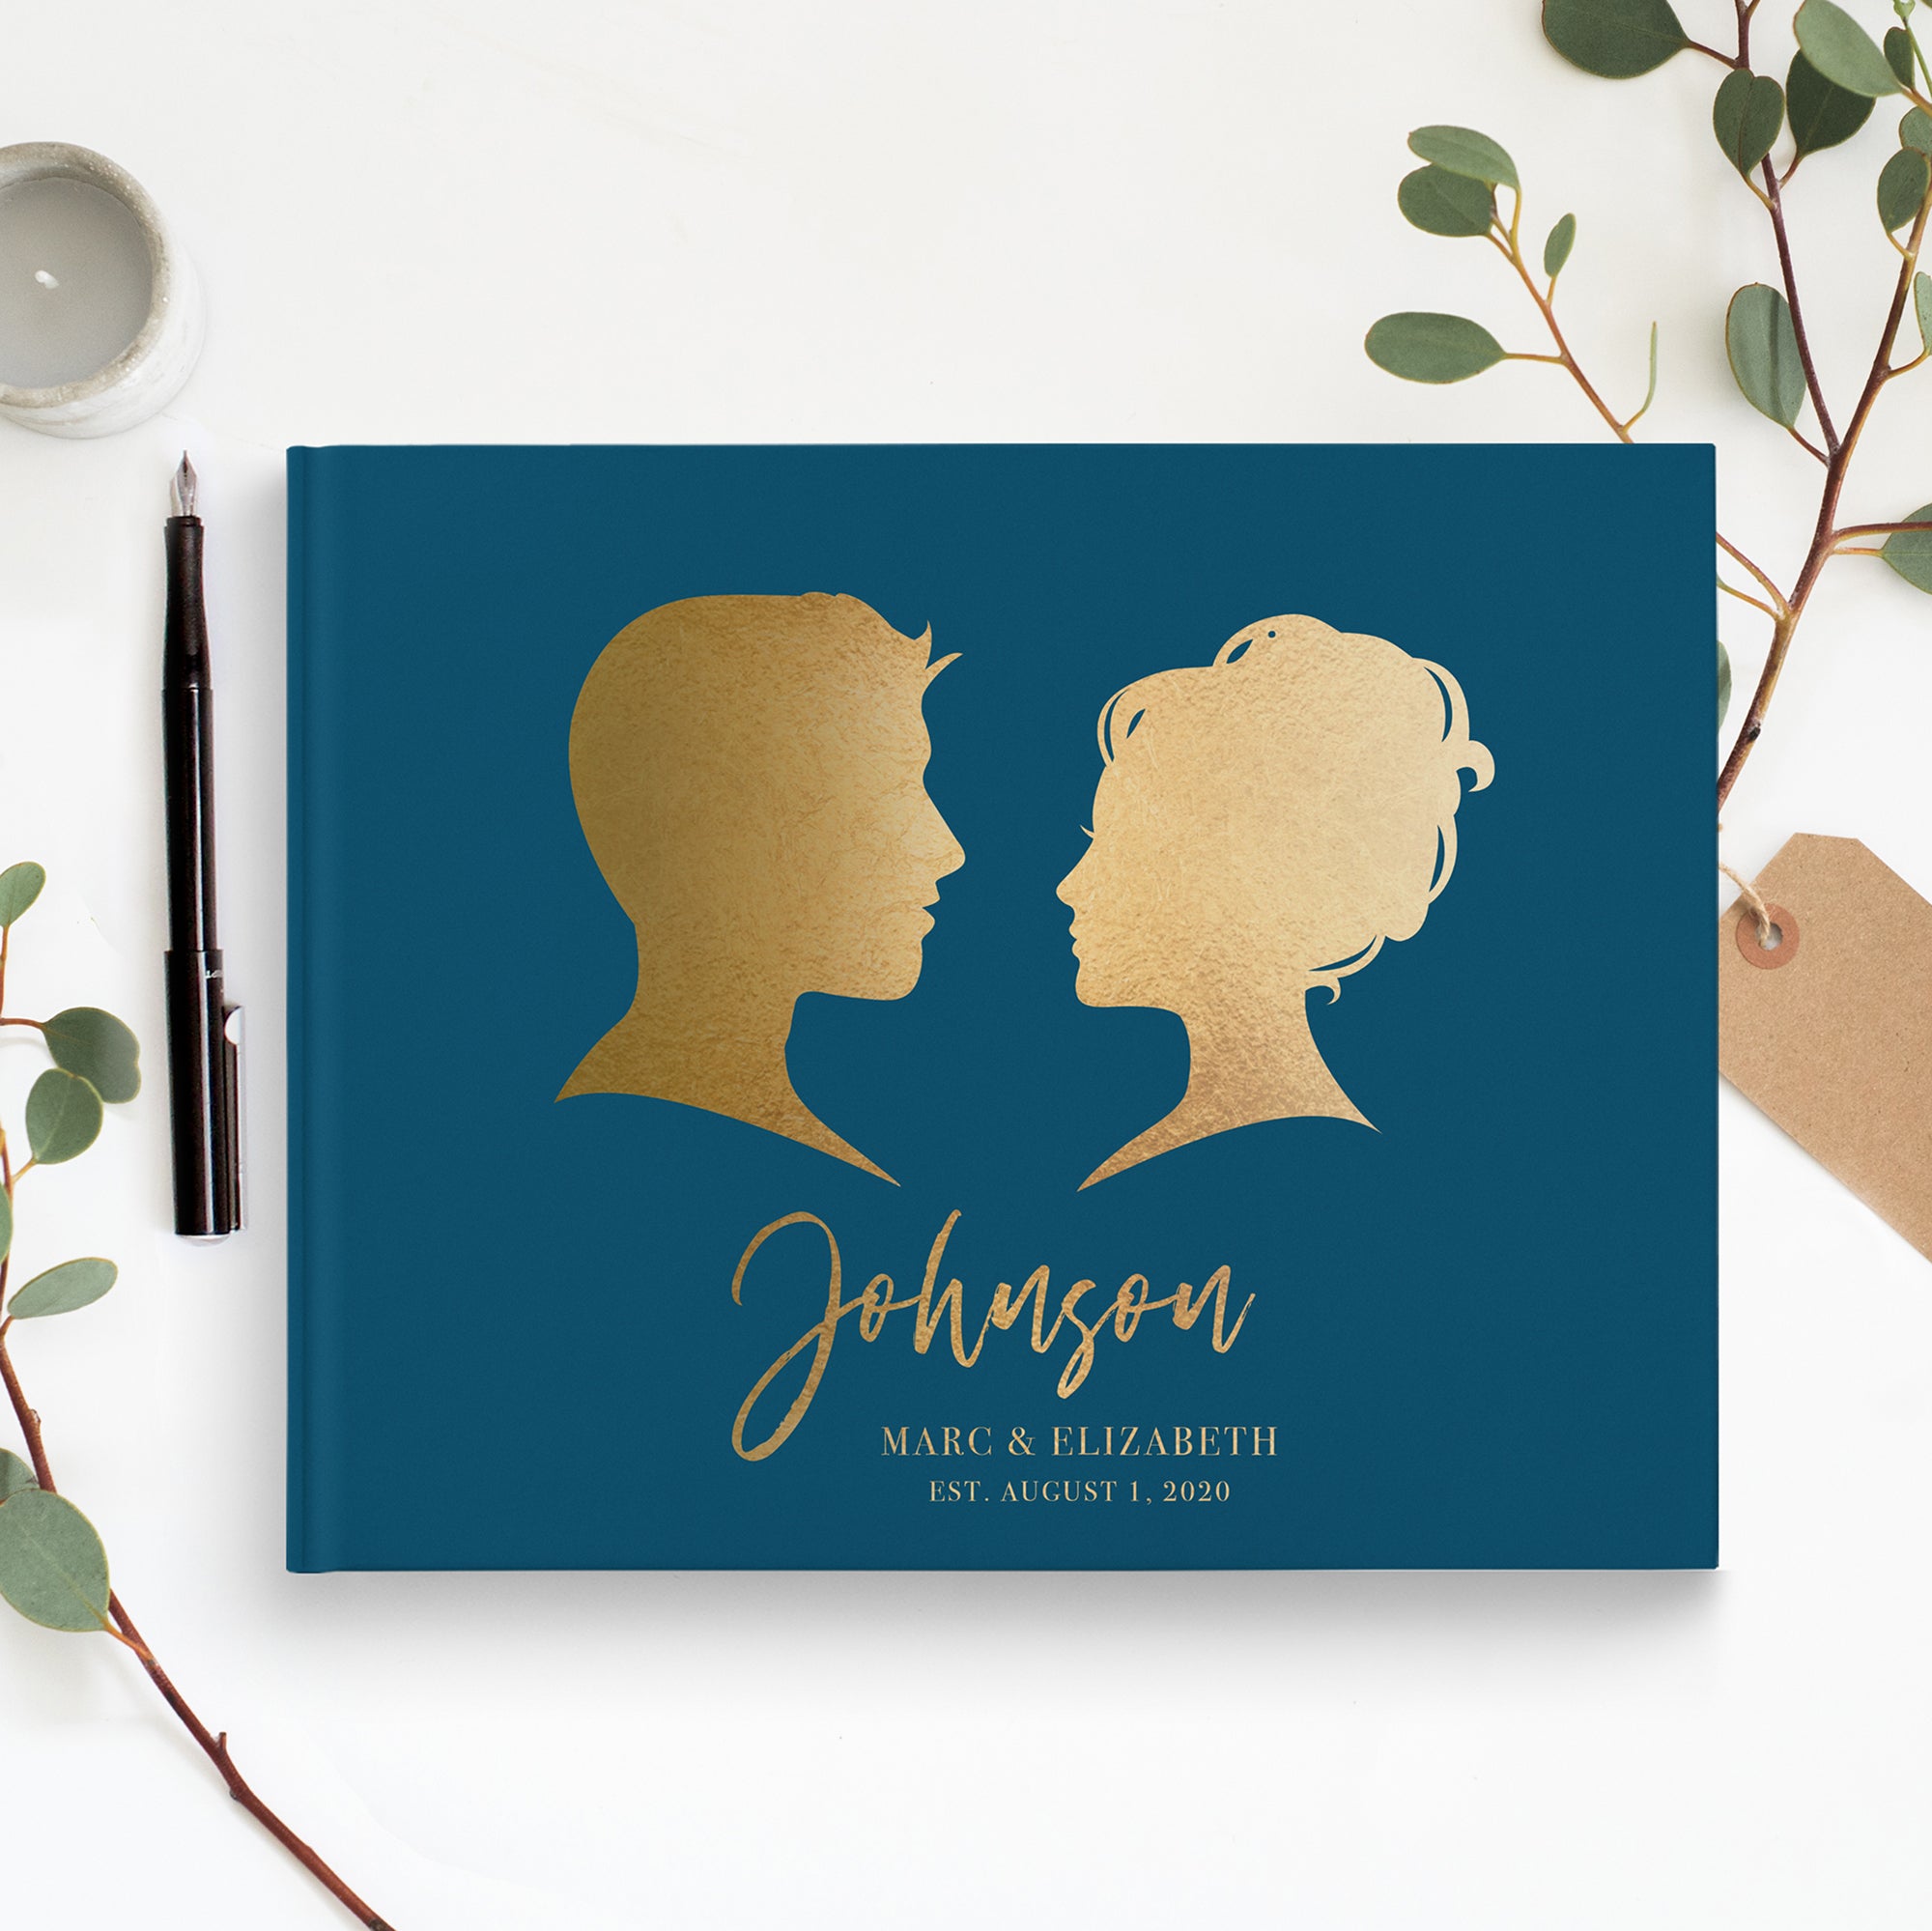 Wedding Guest Book Polaroid Guest Book Wedding Reception 100 Pages Thick  Paper Hardcover 8 x 10 Personalized Wedding Guest Book Alternative with